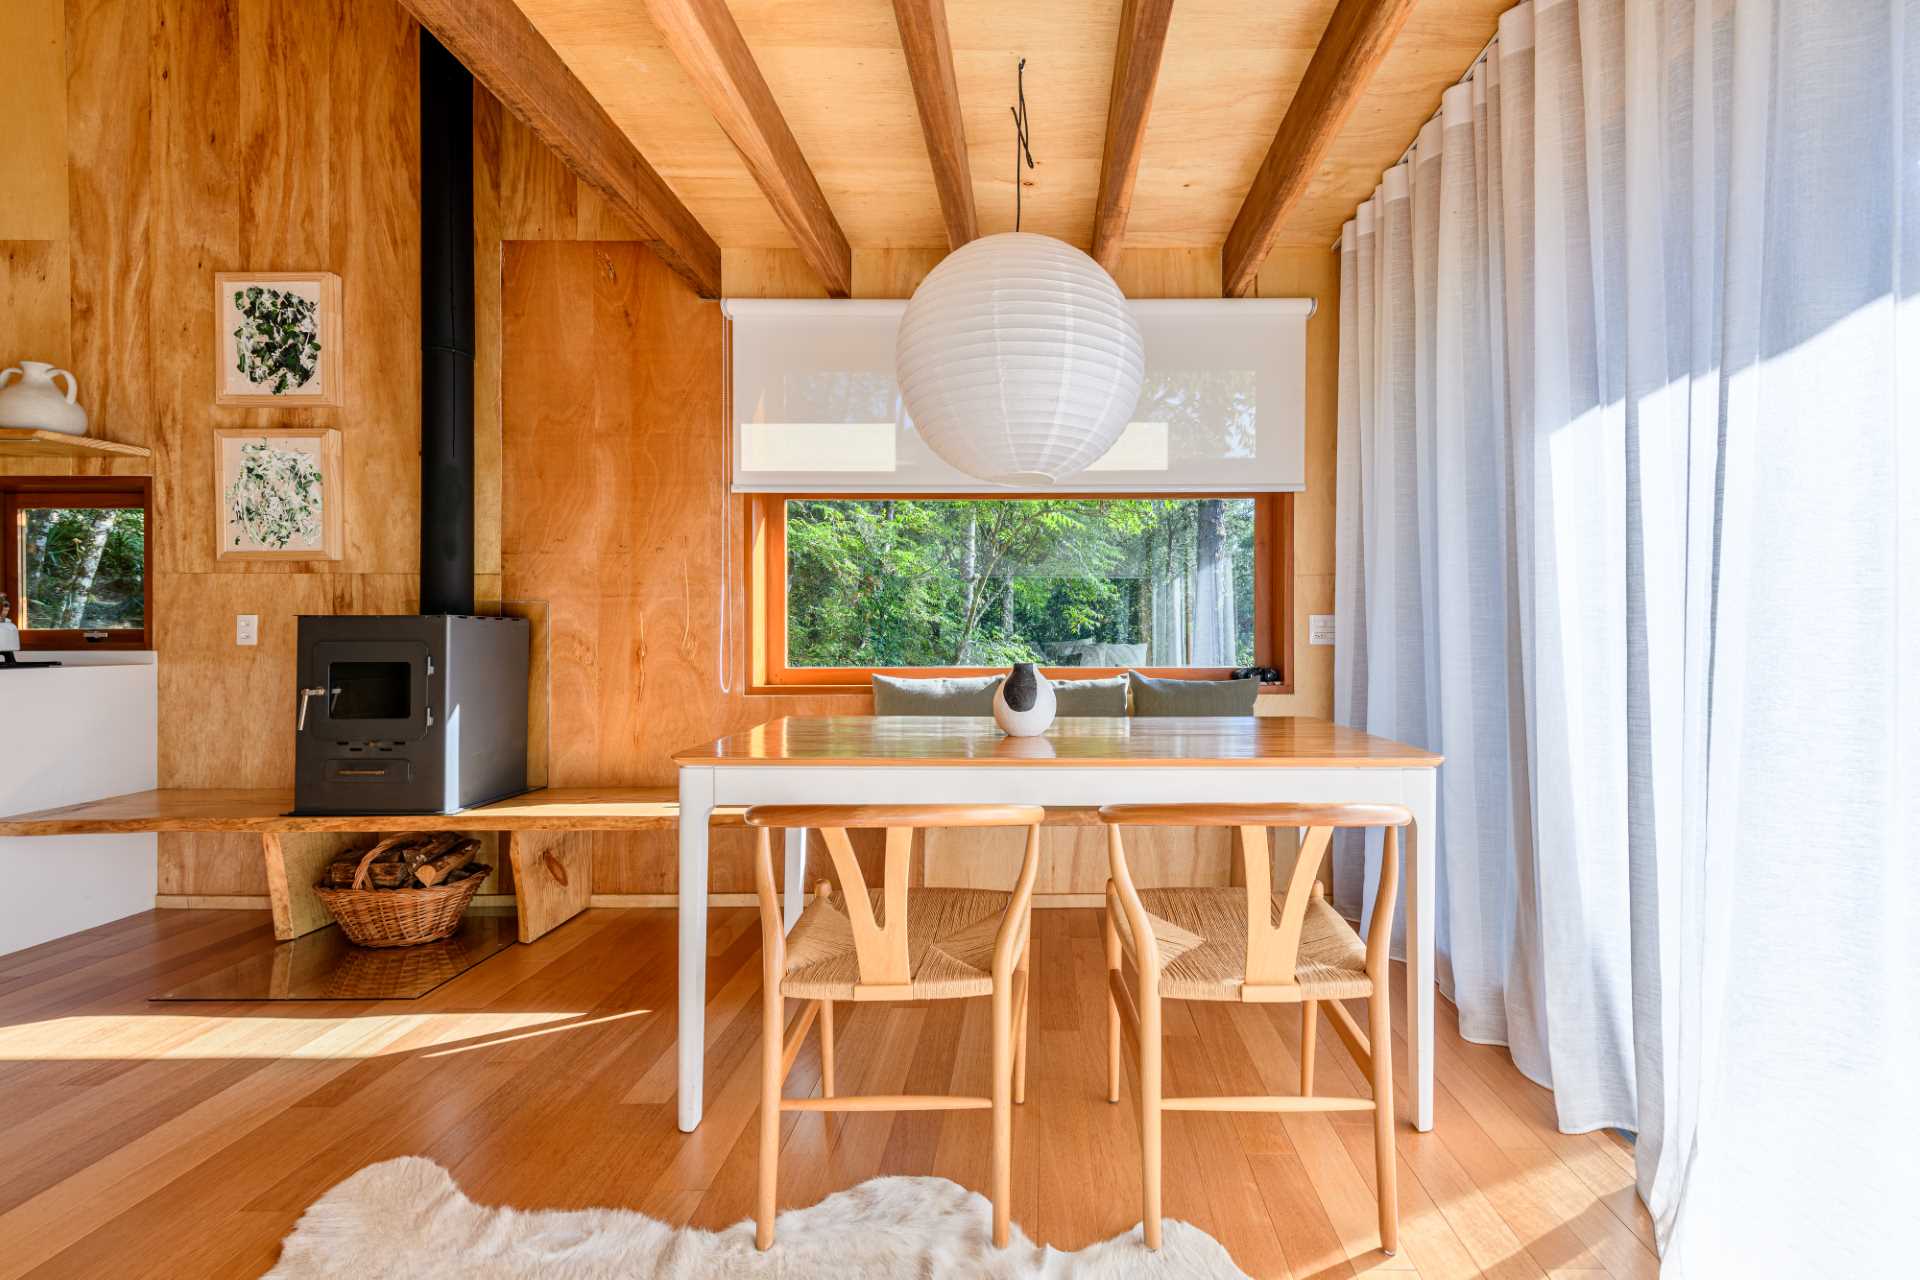 A modern tree house includes a dining area with a table and chairs, and a bench that runs underneath the window to the fireplace.